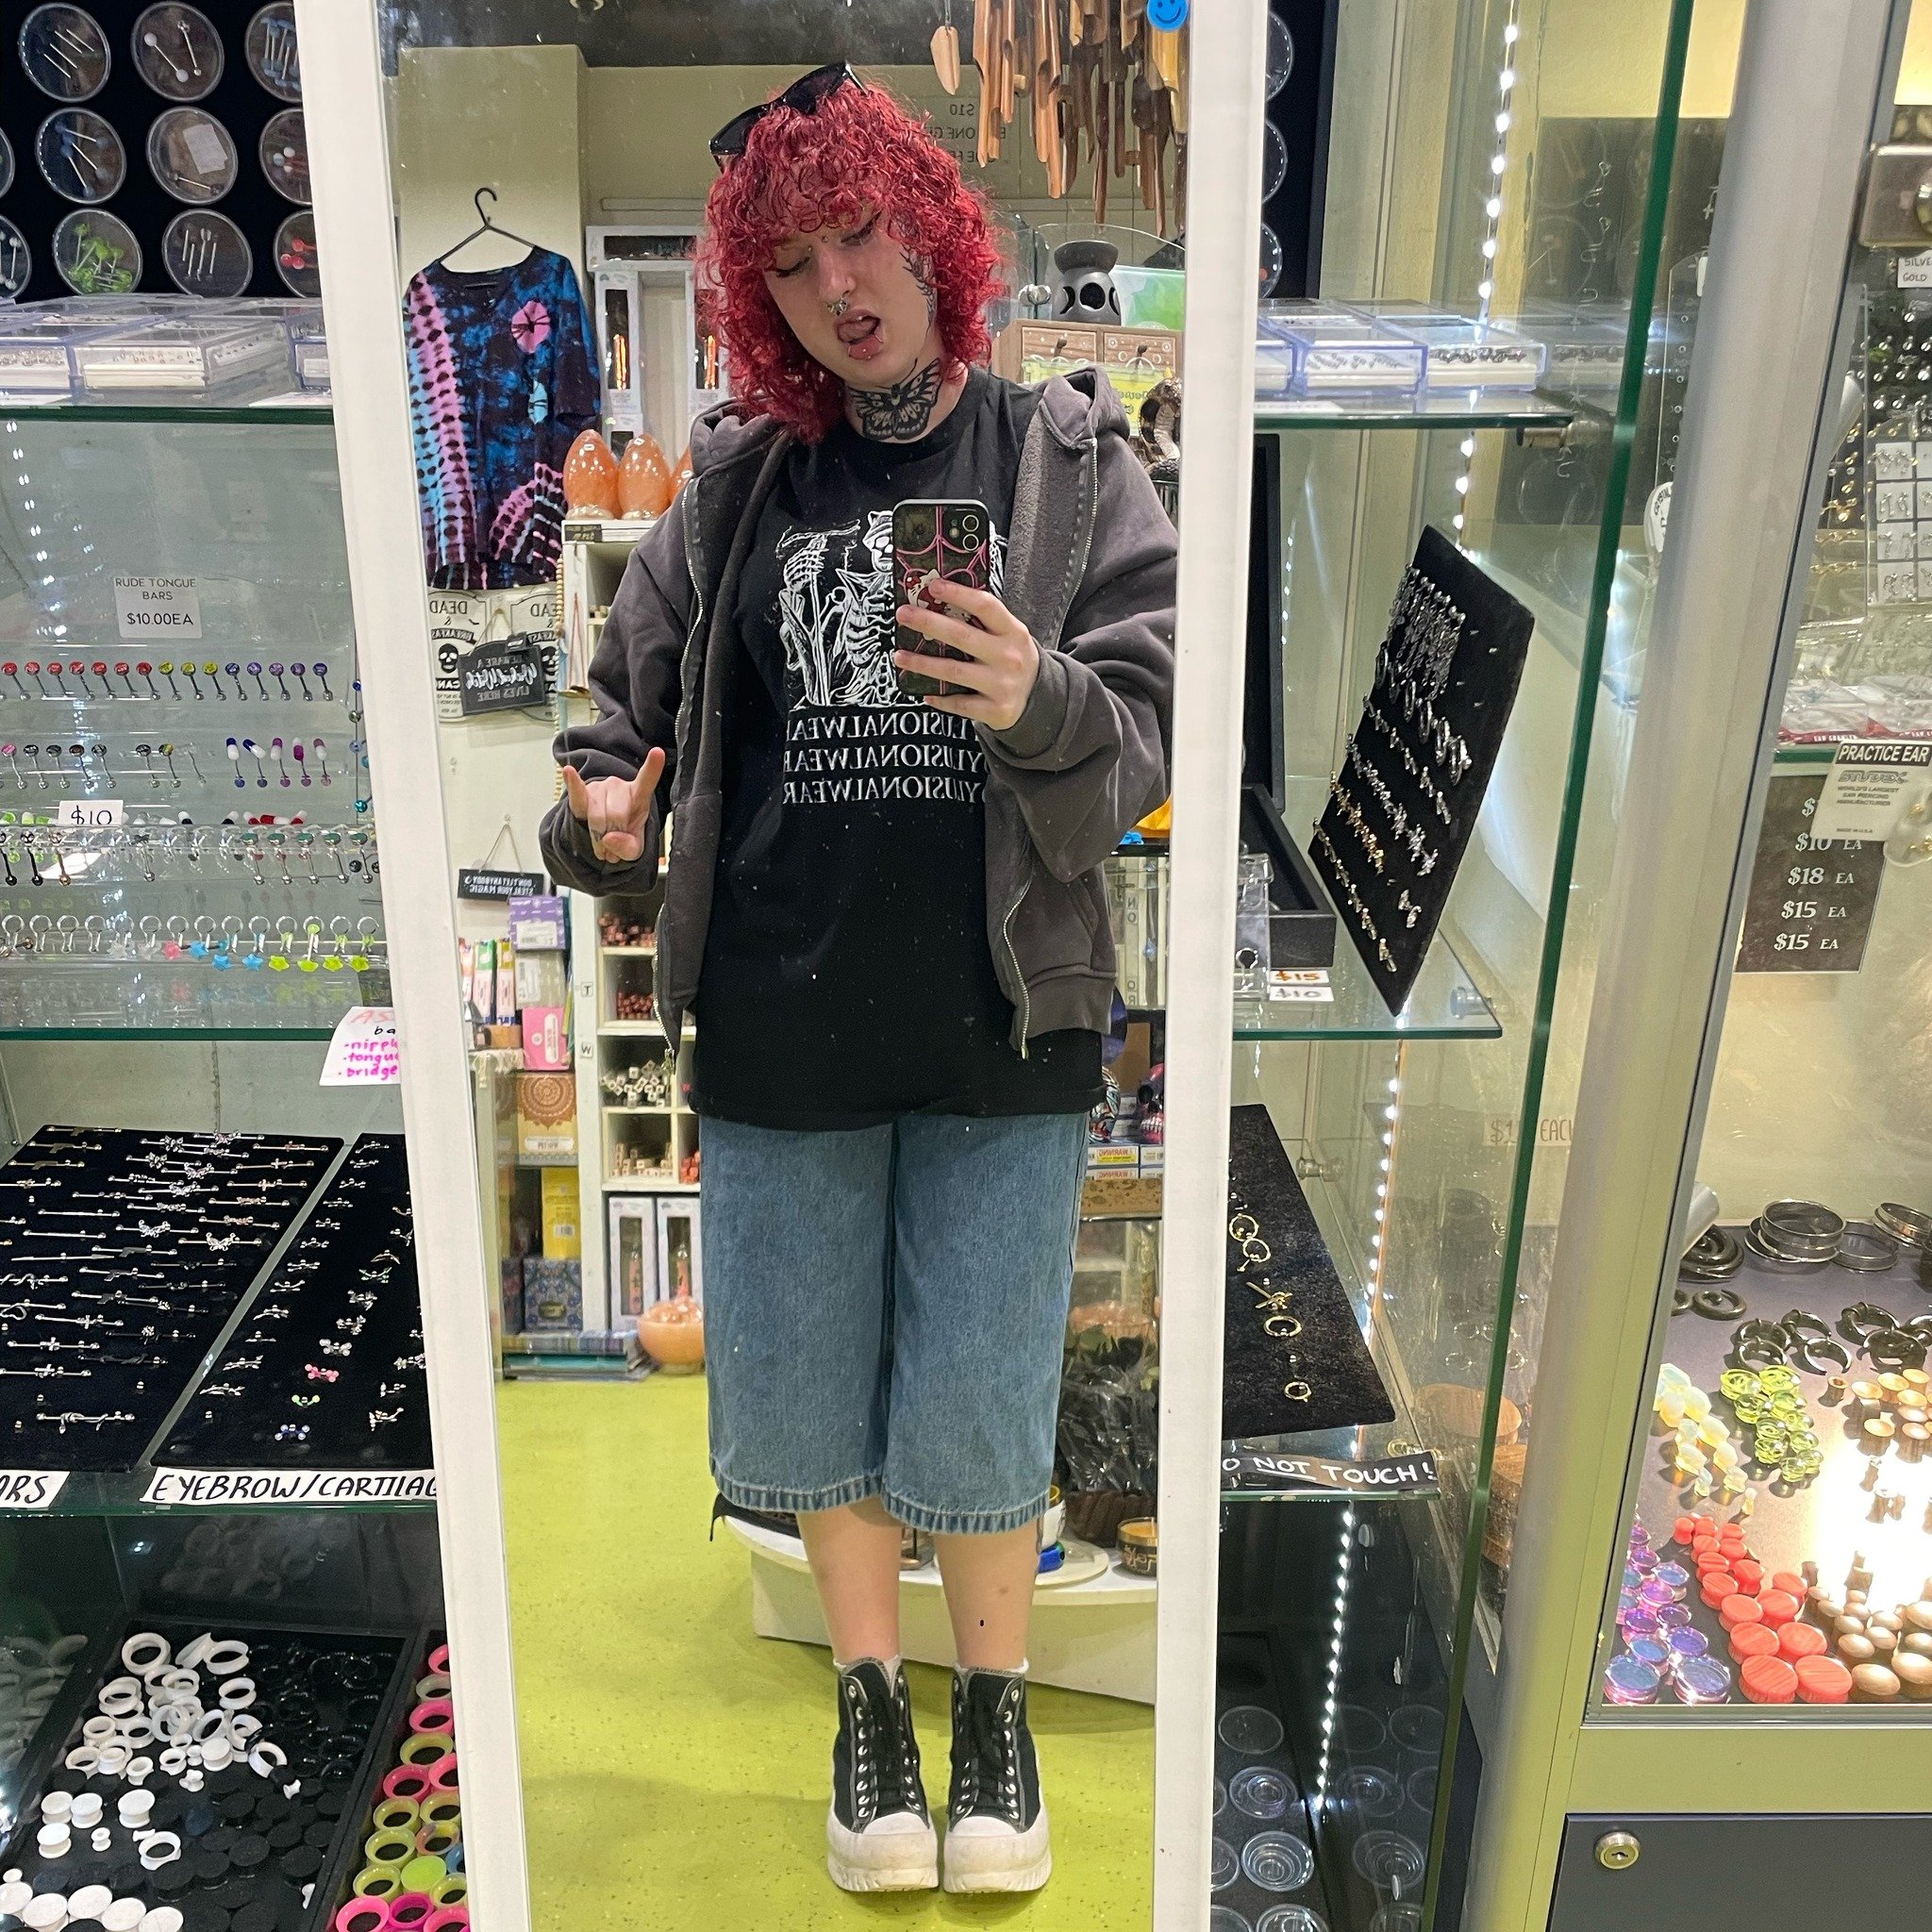 hope everyone had a great weekend! 🤭

today we are open till 5:30pm with @kaylapeacockkk doing all your piercings! 💉

@deadsundayy will be serving you from behind the counter from 11am 🛍️

pop in-store for some rad sh*t or a new piercing! 👀

PSA: